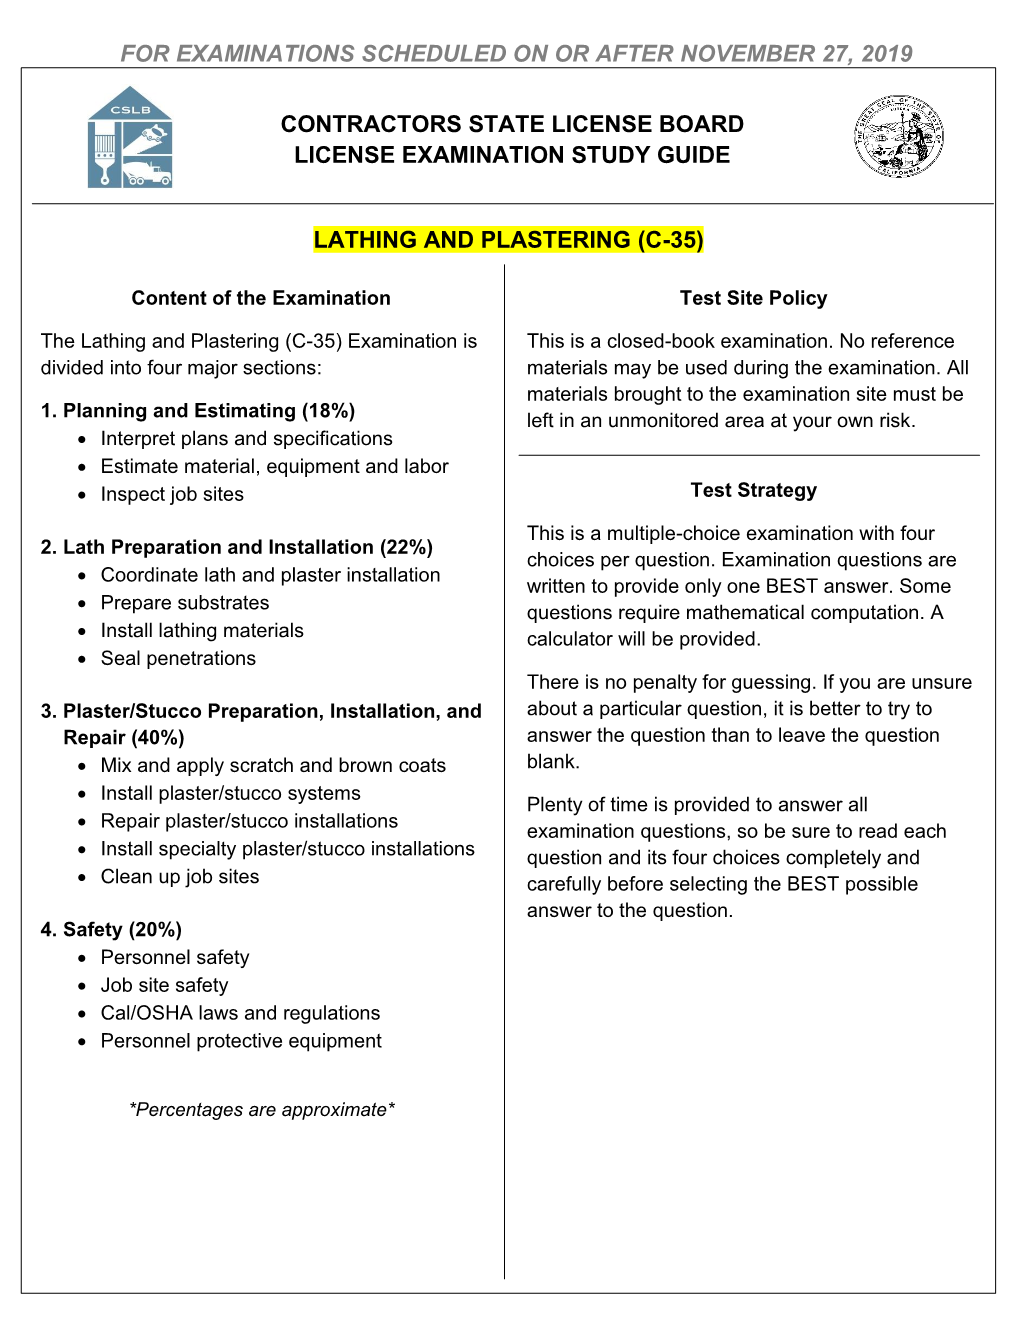 C-35 Lathing and Plastering Study Guide